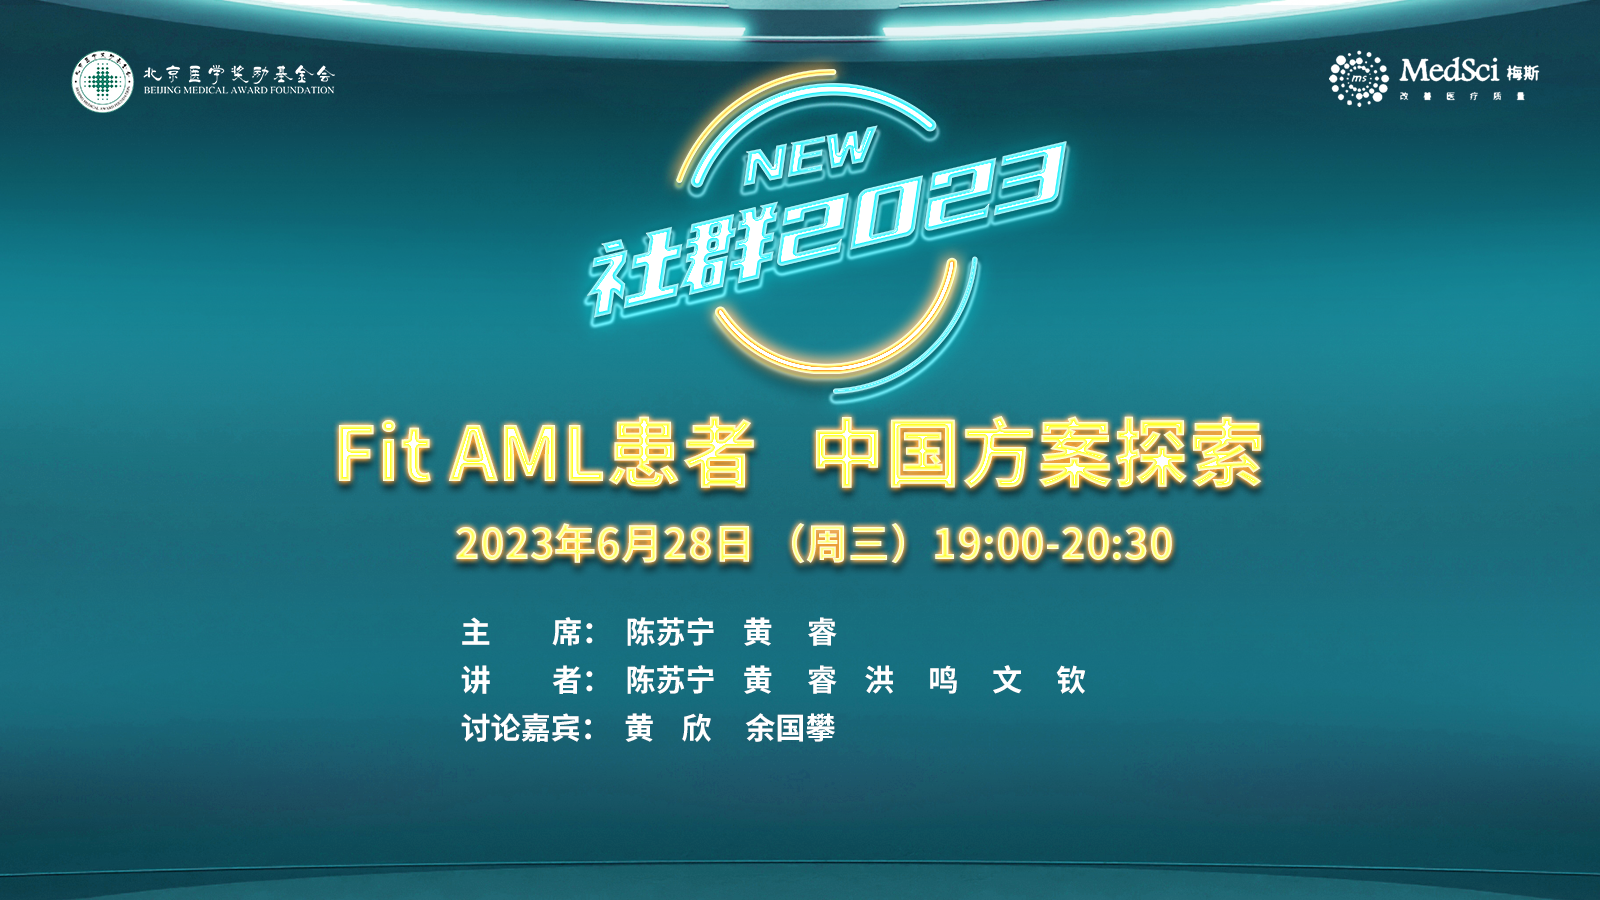 Fit AML患者中国方案<font color="red">探索</font>